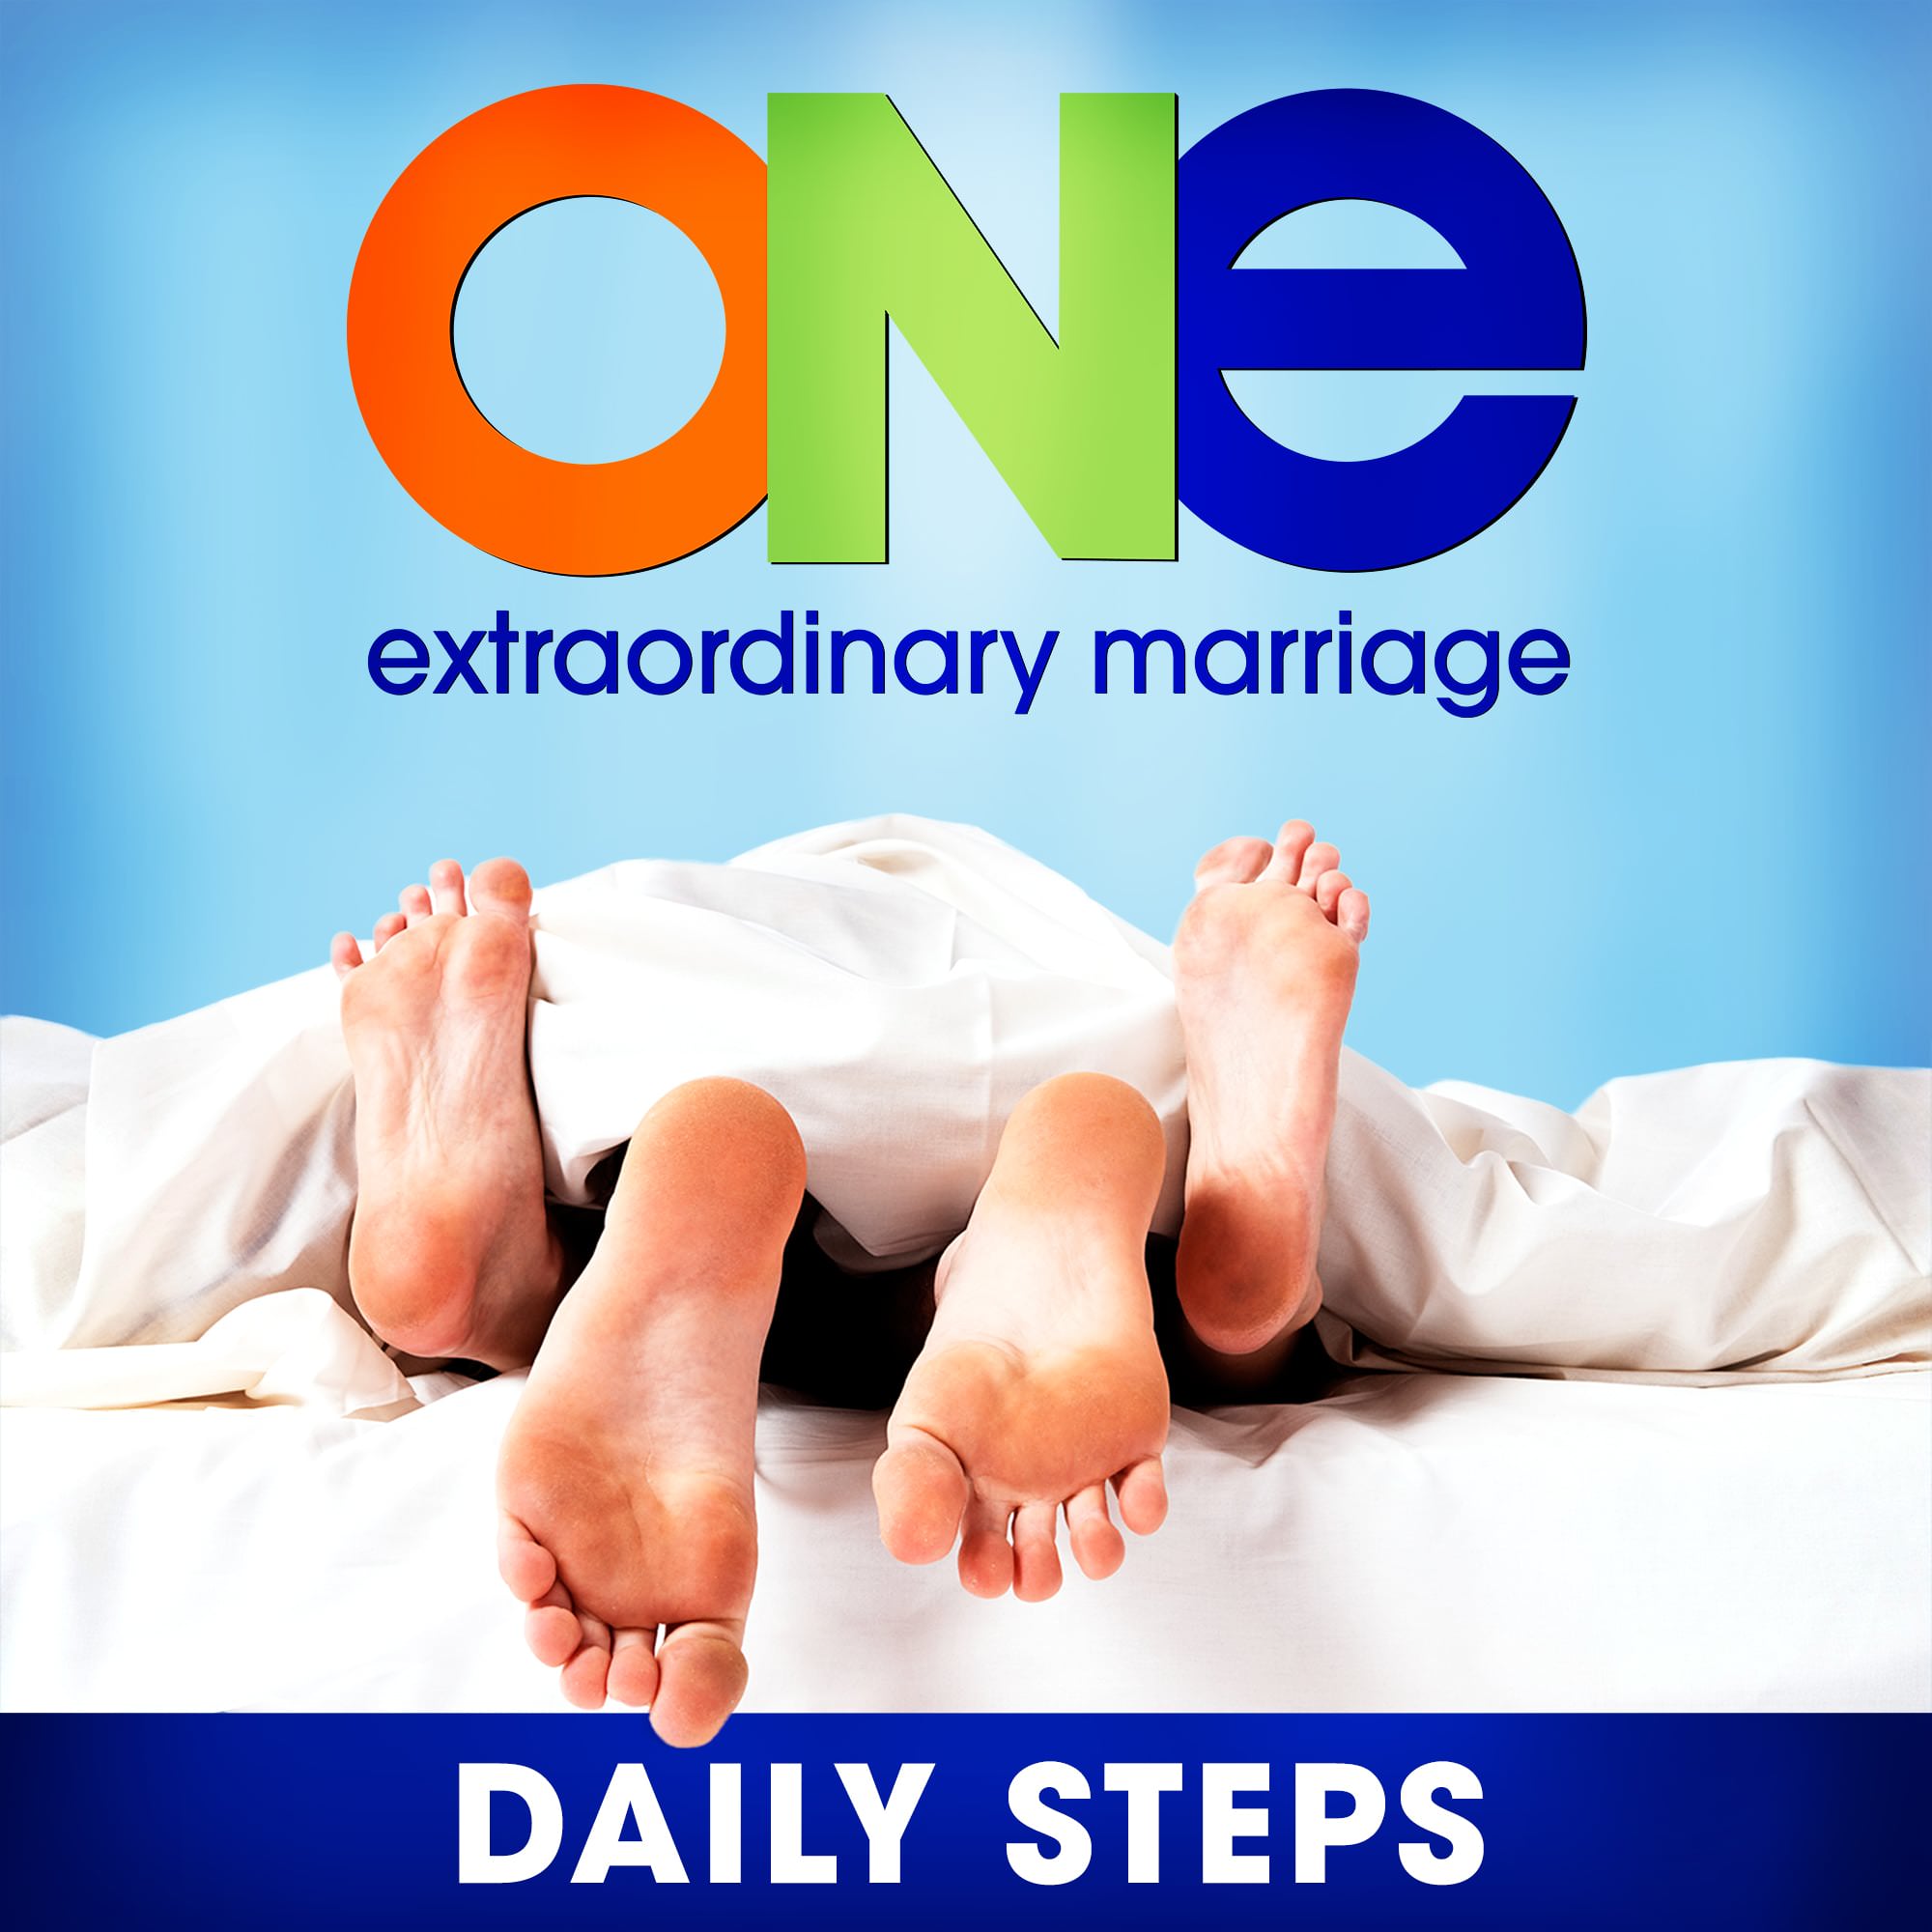 DS 067: How Do We Share with Family That My Husband is Going to be a Stay at Home Dad?